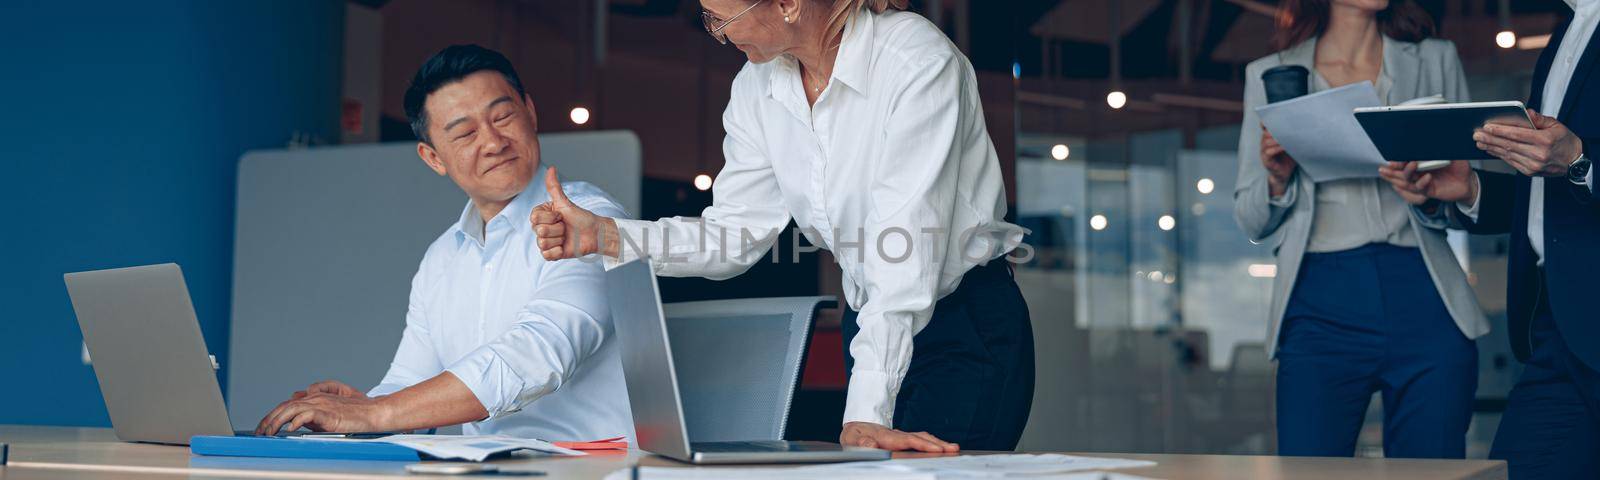 mature female employee discussing online project, showing presentation to skilled team leader.